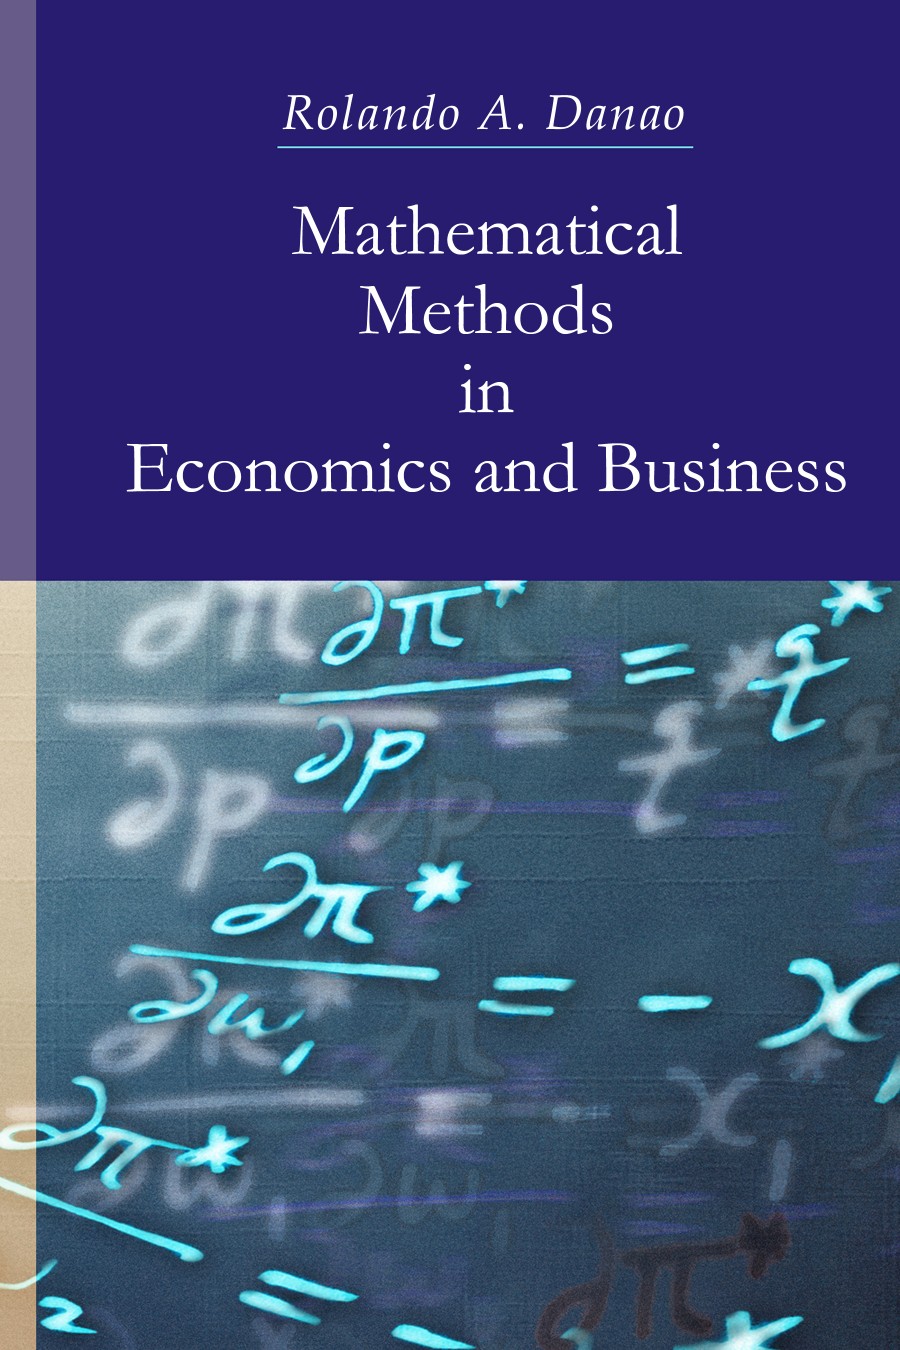 Mathematical methods in economics and business